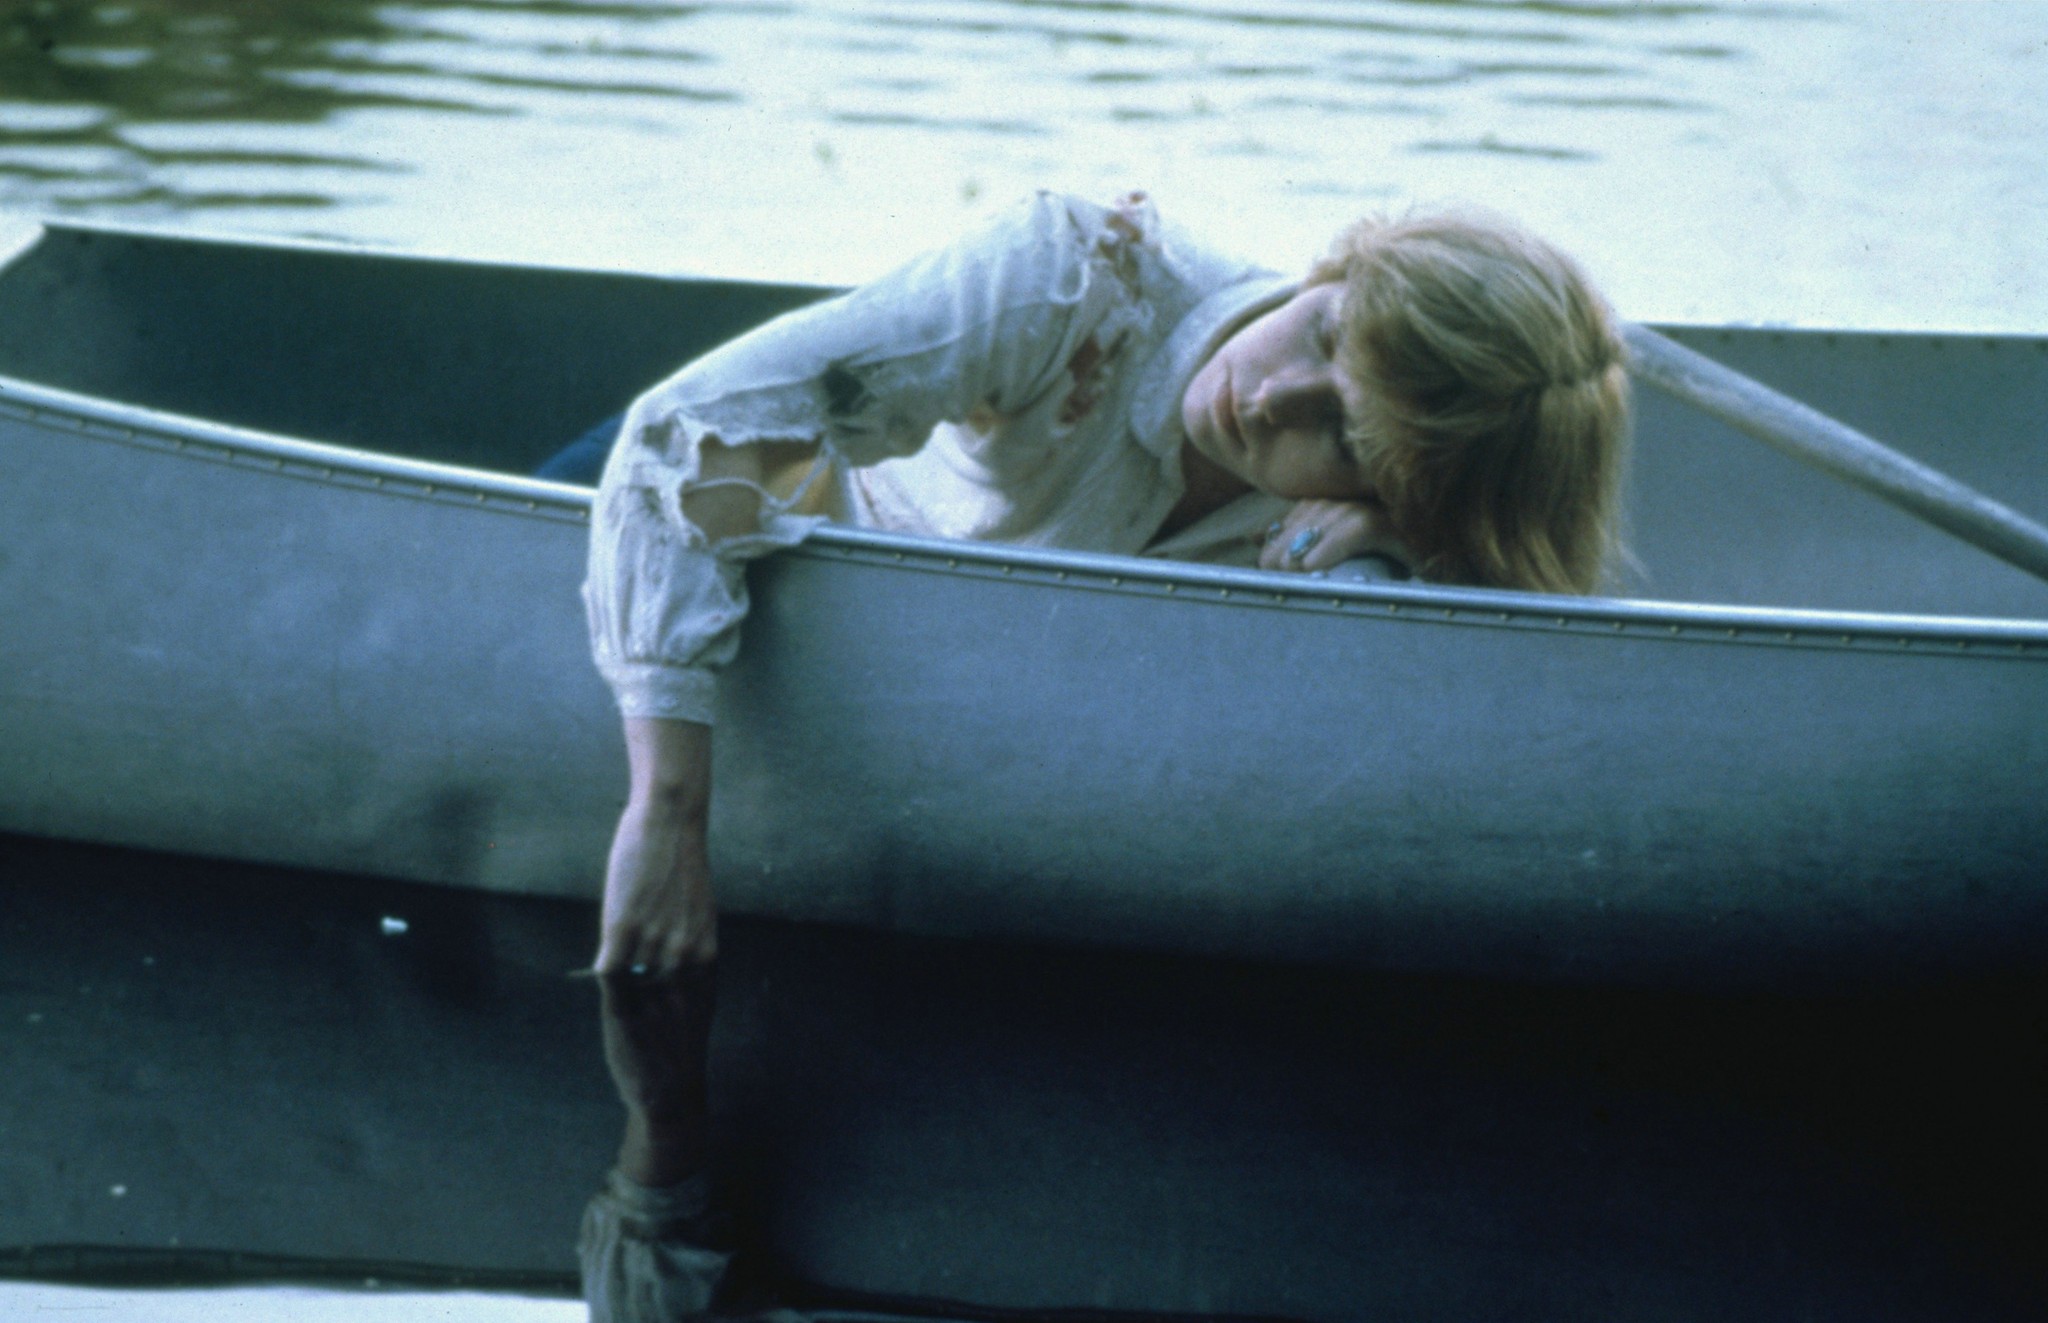 [News] Friday the 13th Prequel Series, CRYSTAL LAKE, Greenlit